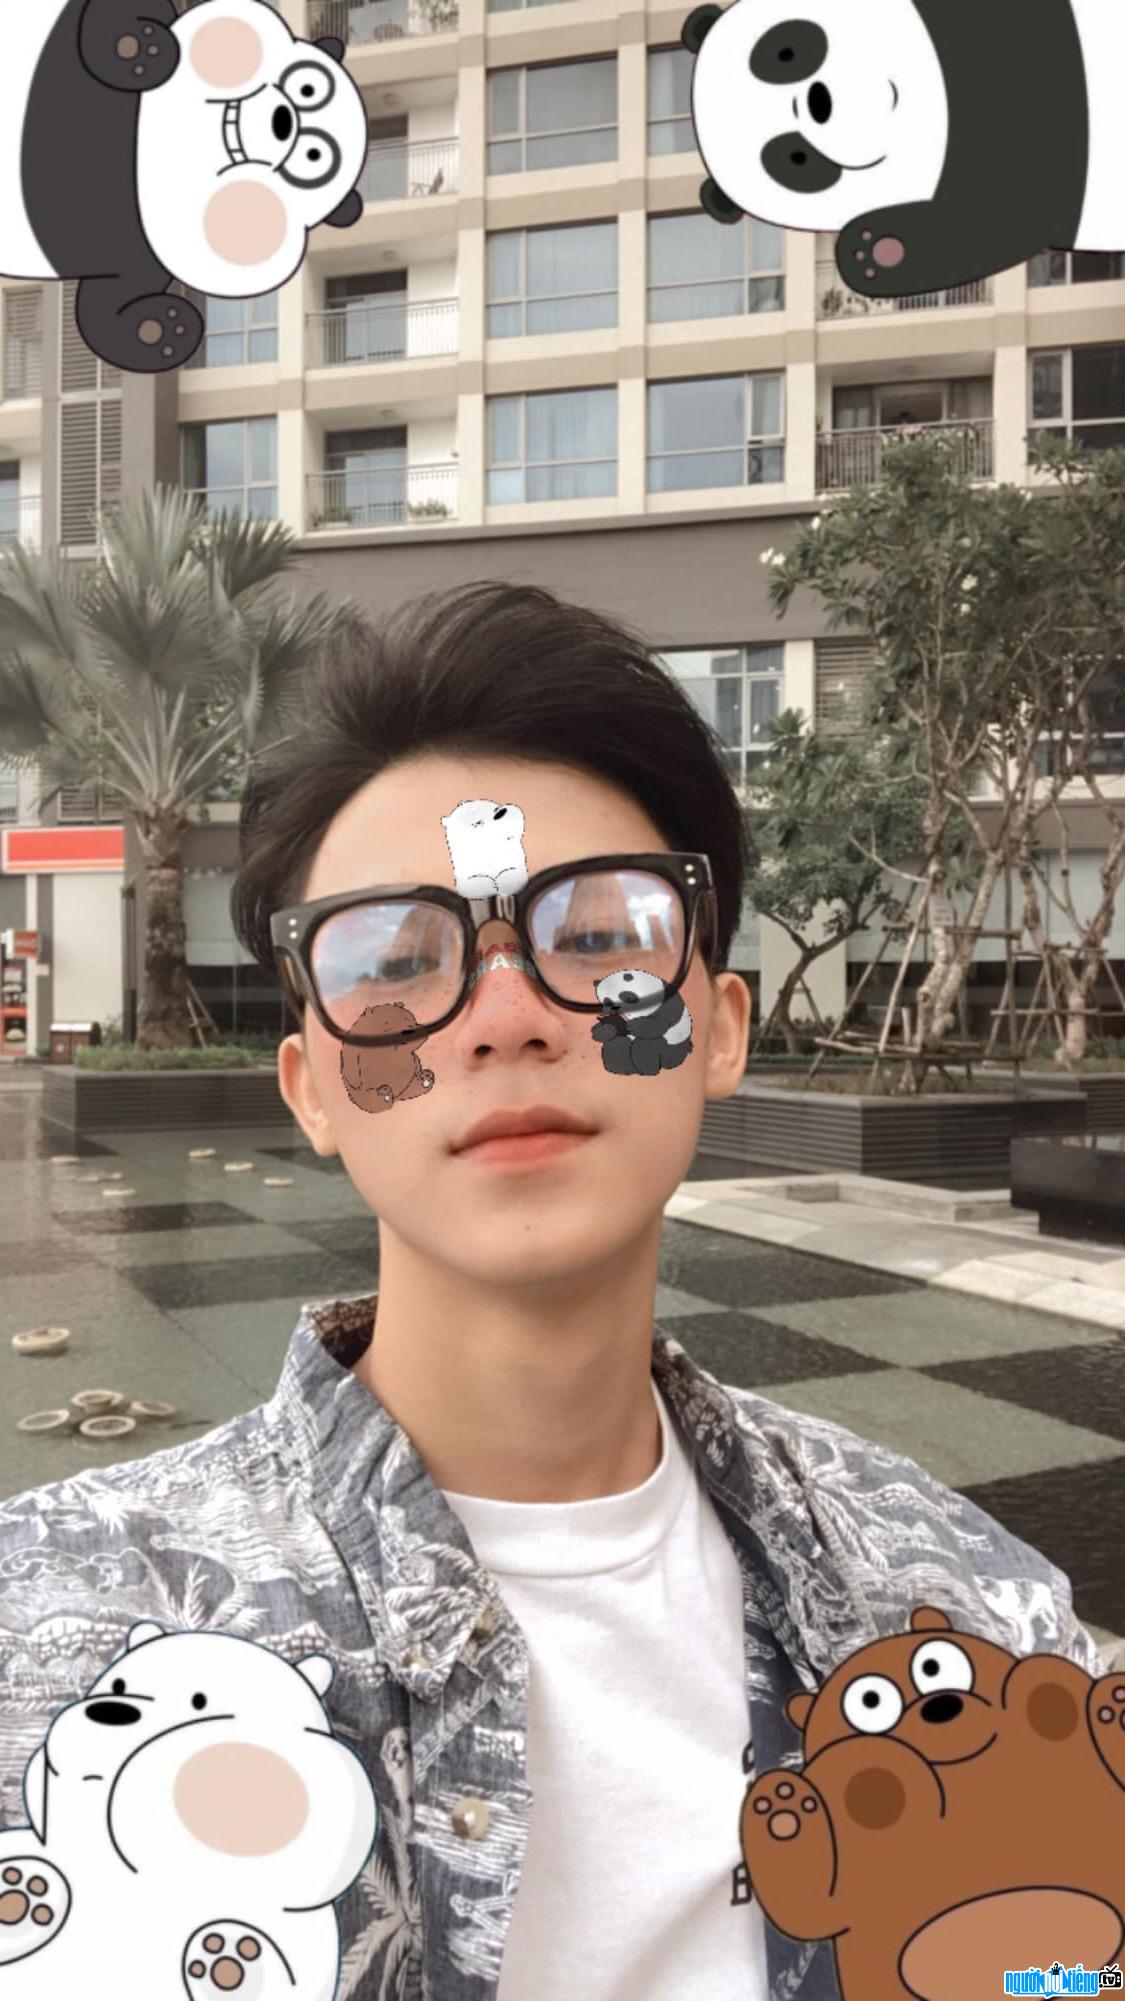  Chu Hoang Diep is handsome and funny